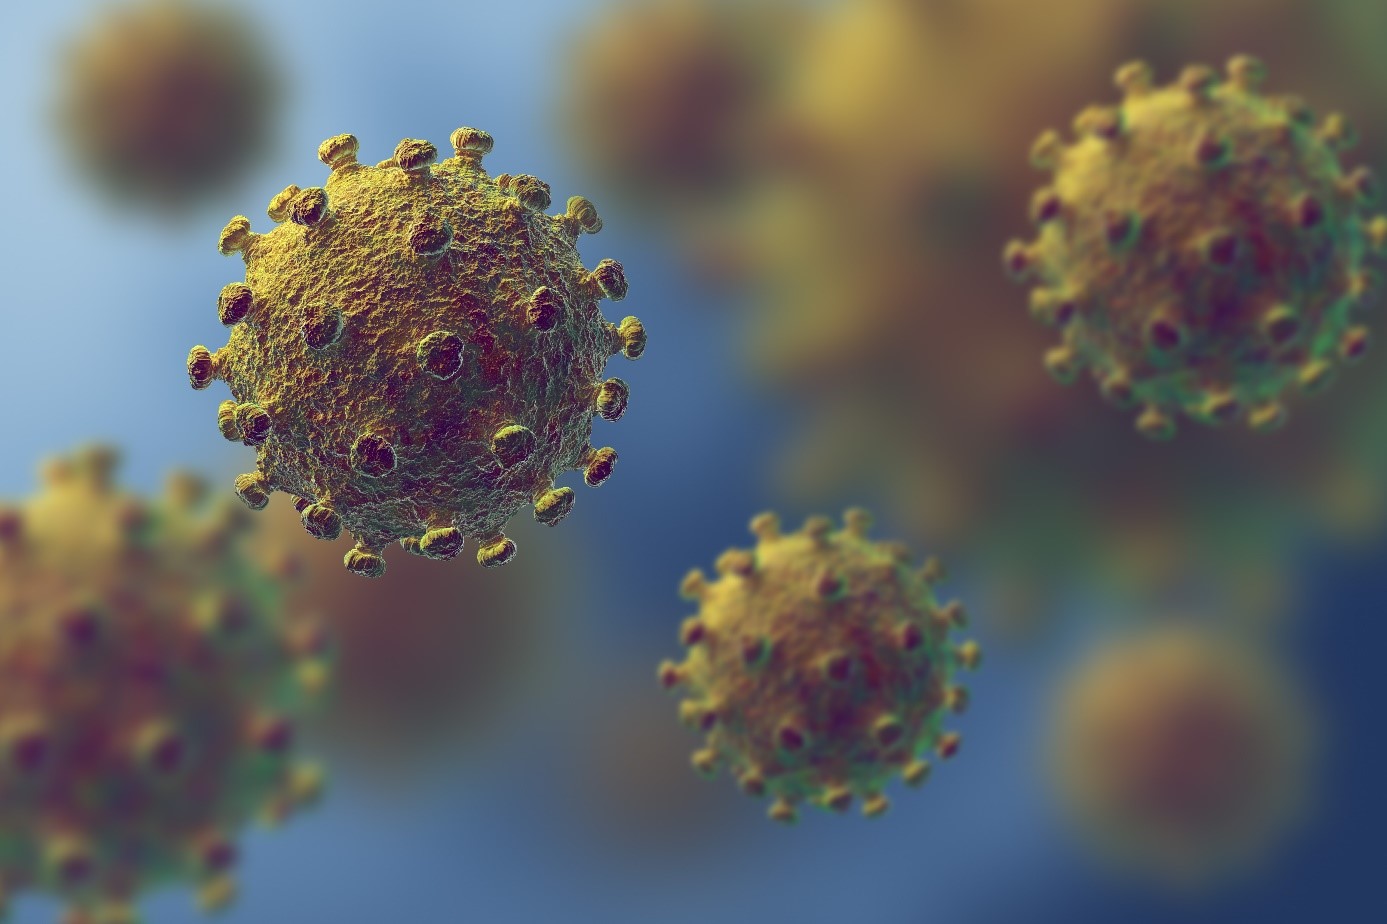 Listening to the experts: ESMH interviews with scientists on coronavirus